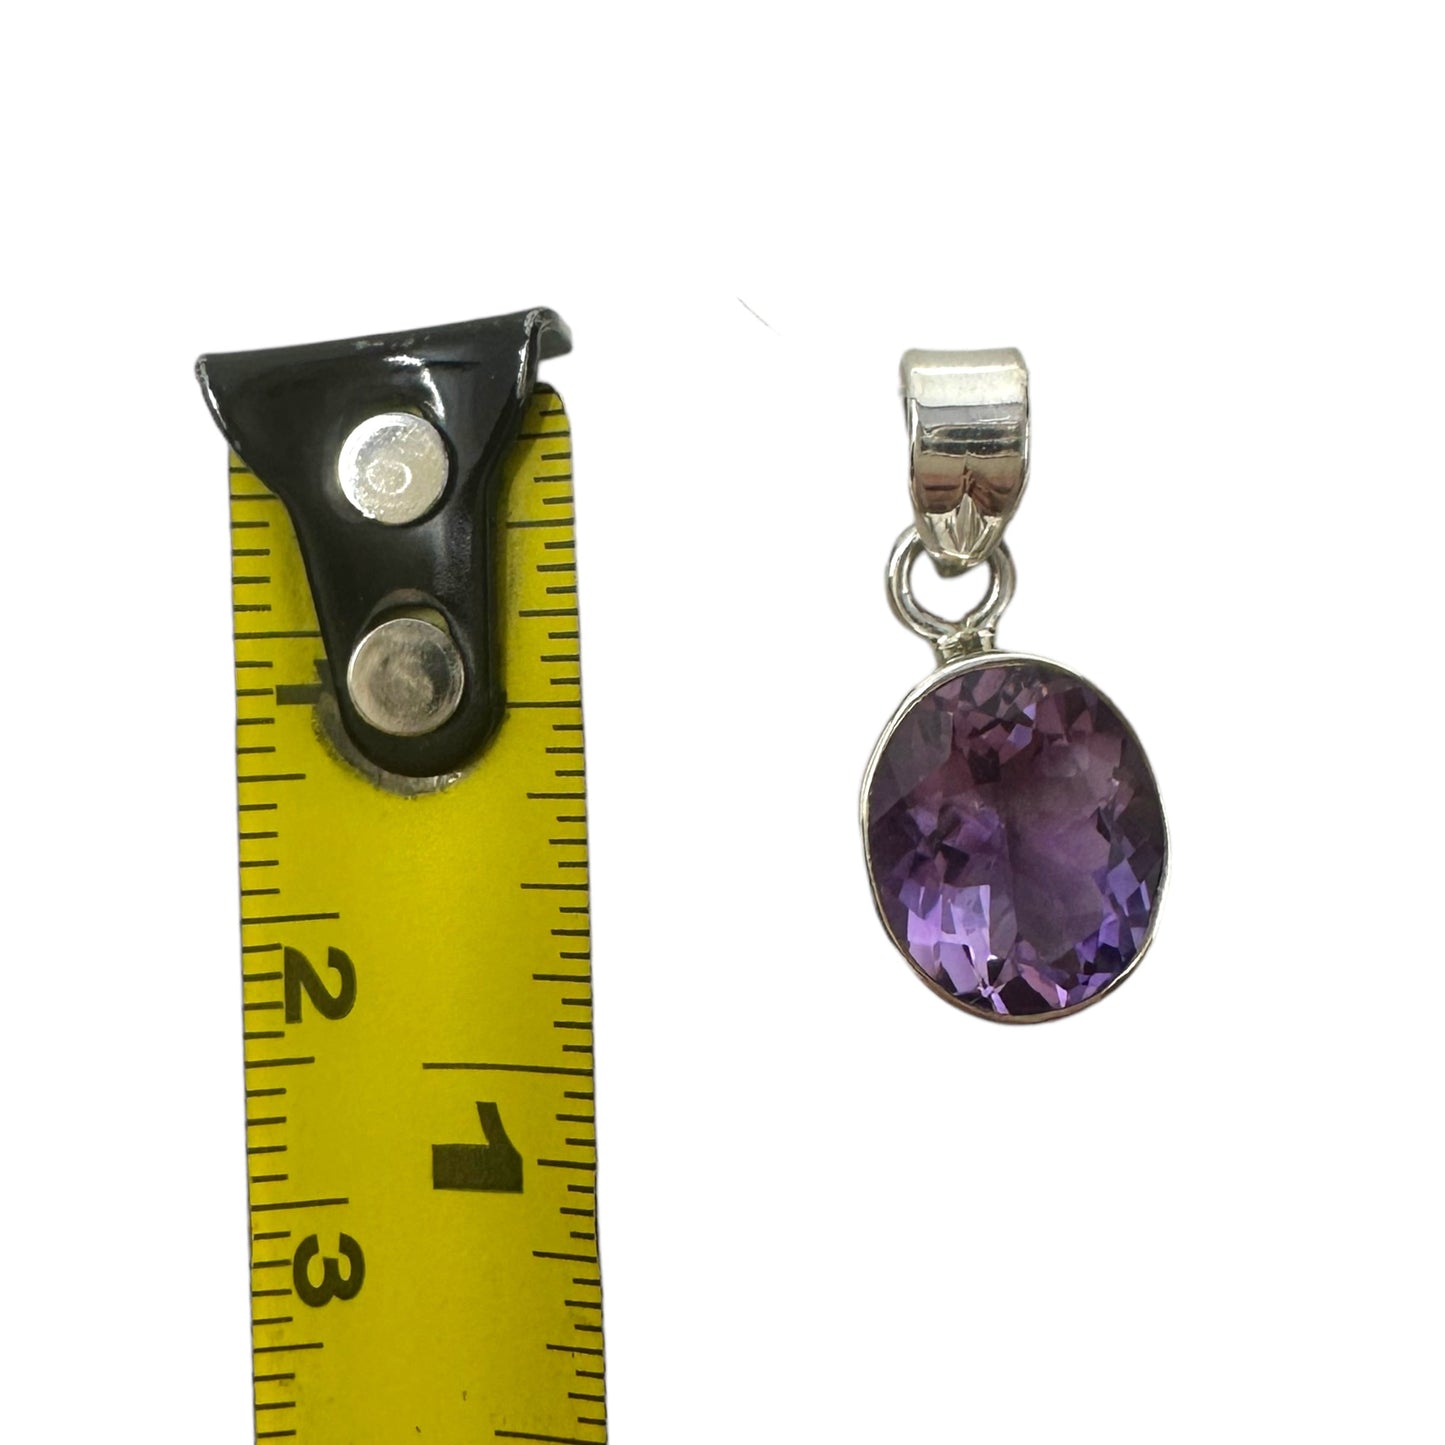 Amethyst & Sterling Silver Pendant Unknown Brand